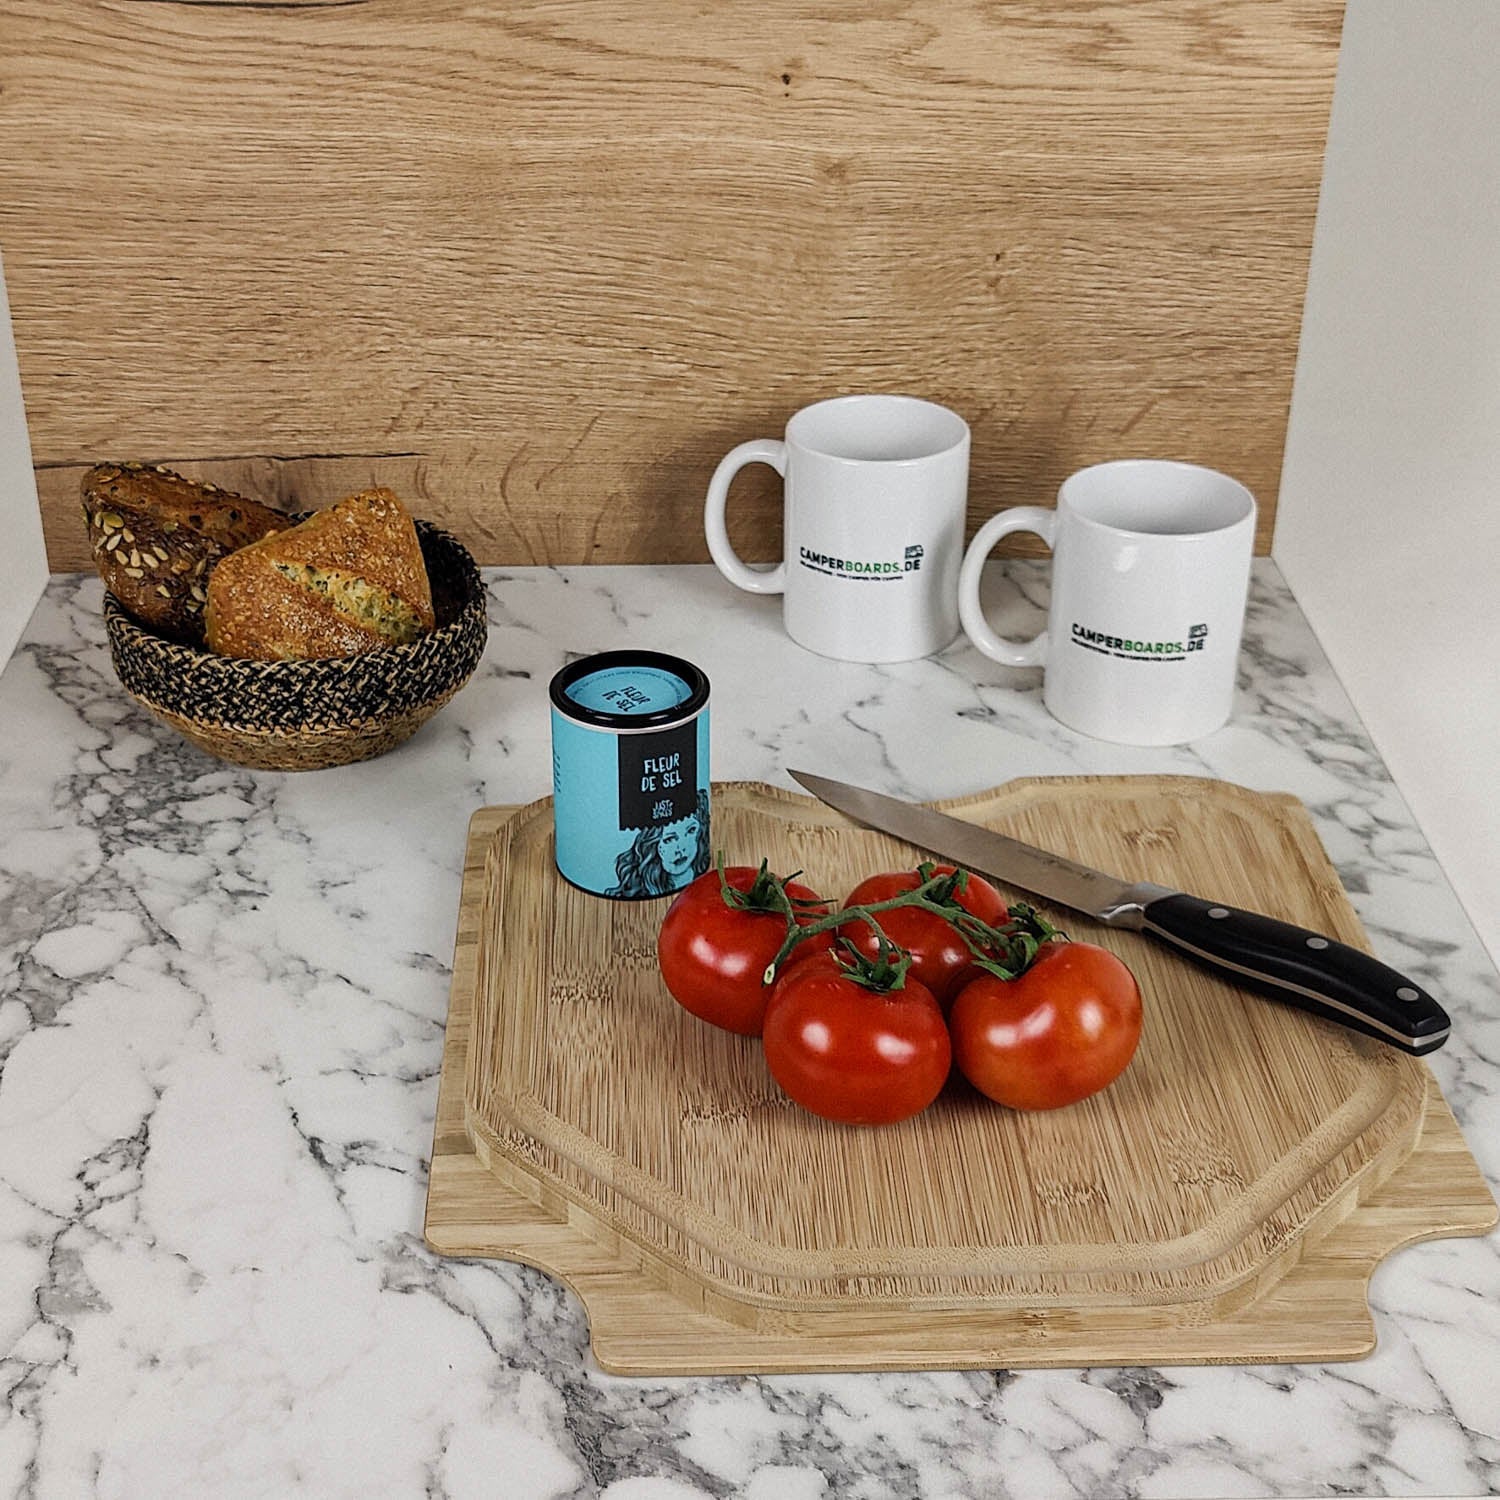 Cutting board with sink cover for Sunliving models